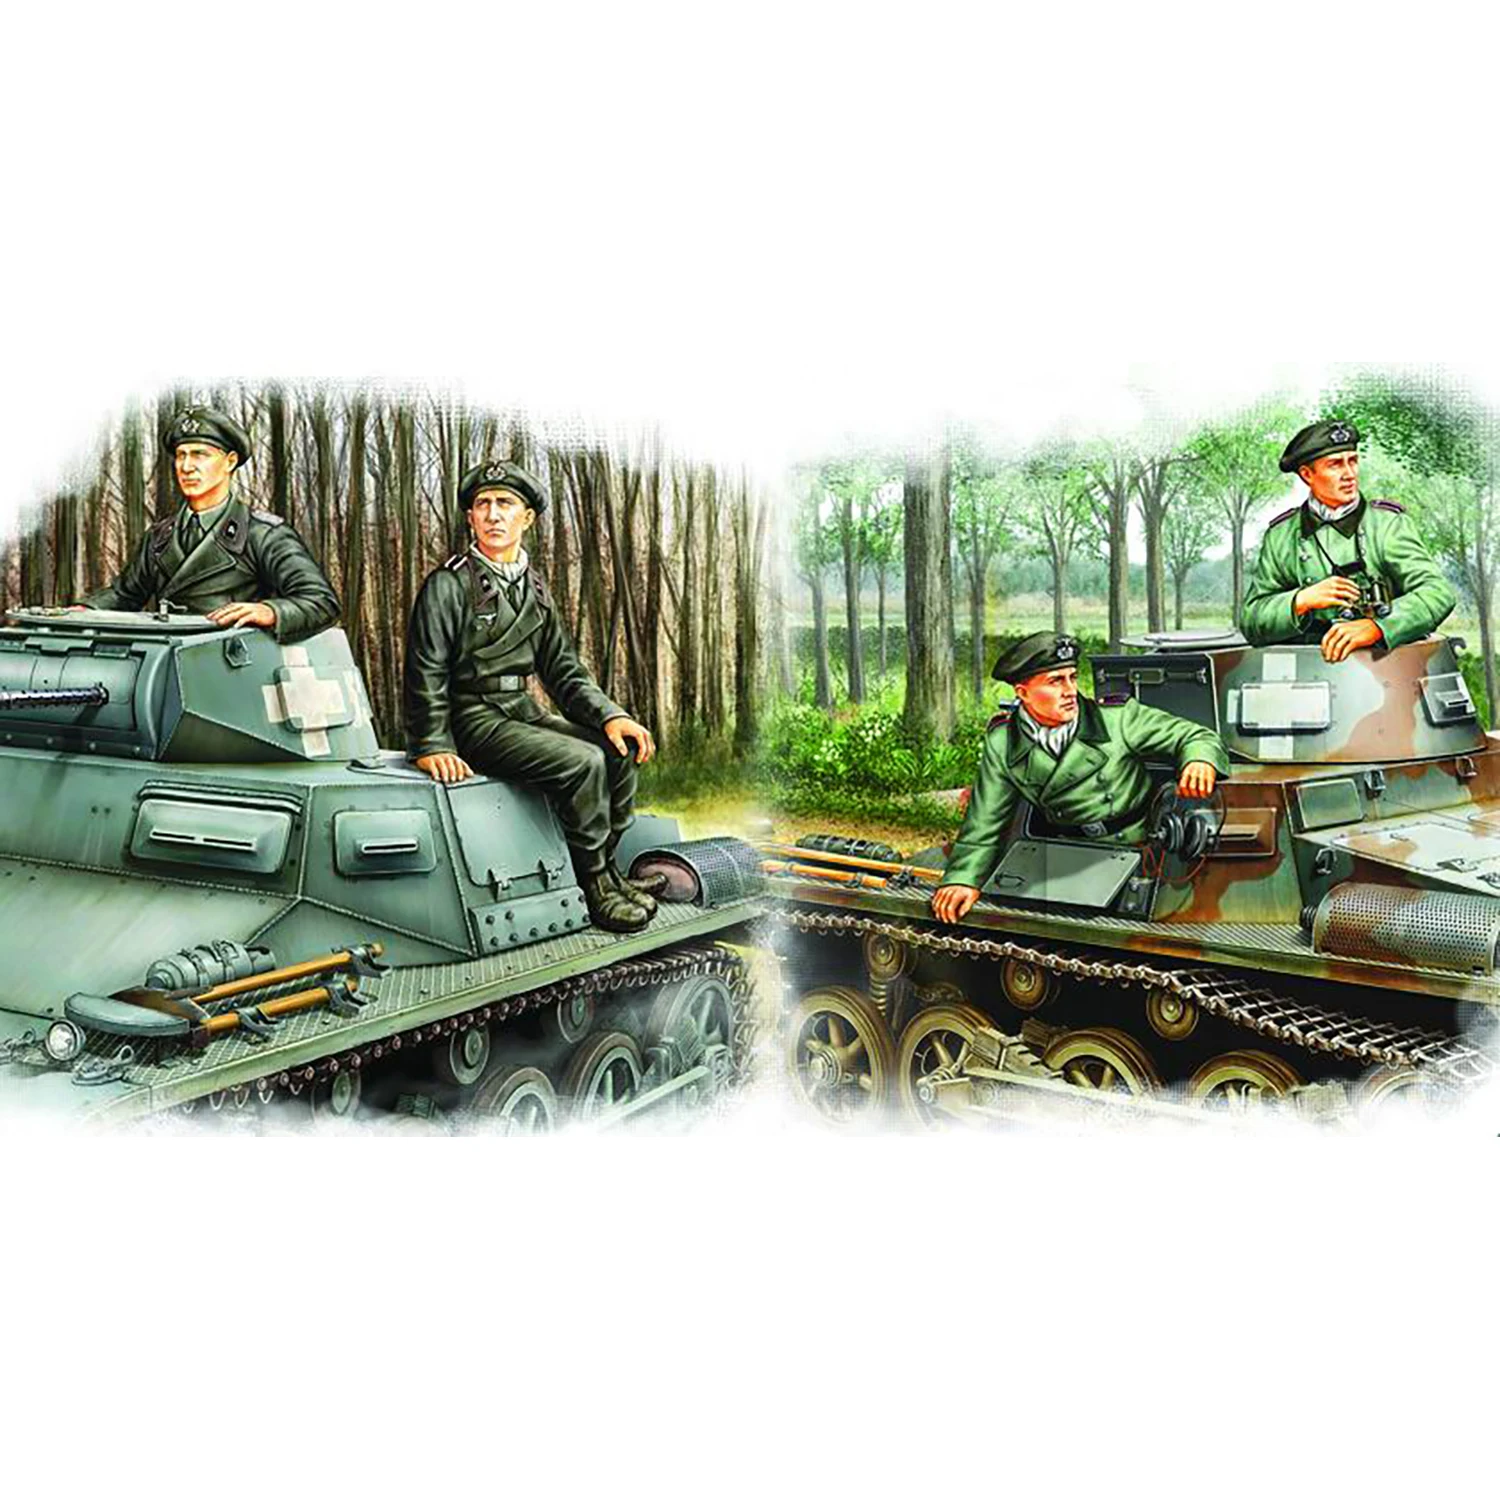 

1/35 84419 Hobby Boss Plastic Static Military Figures German Panzer Crew Soldier Set Model DIY Kits Toys TH19874-SMT2